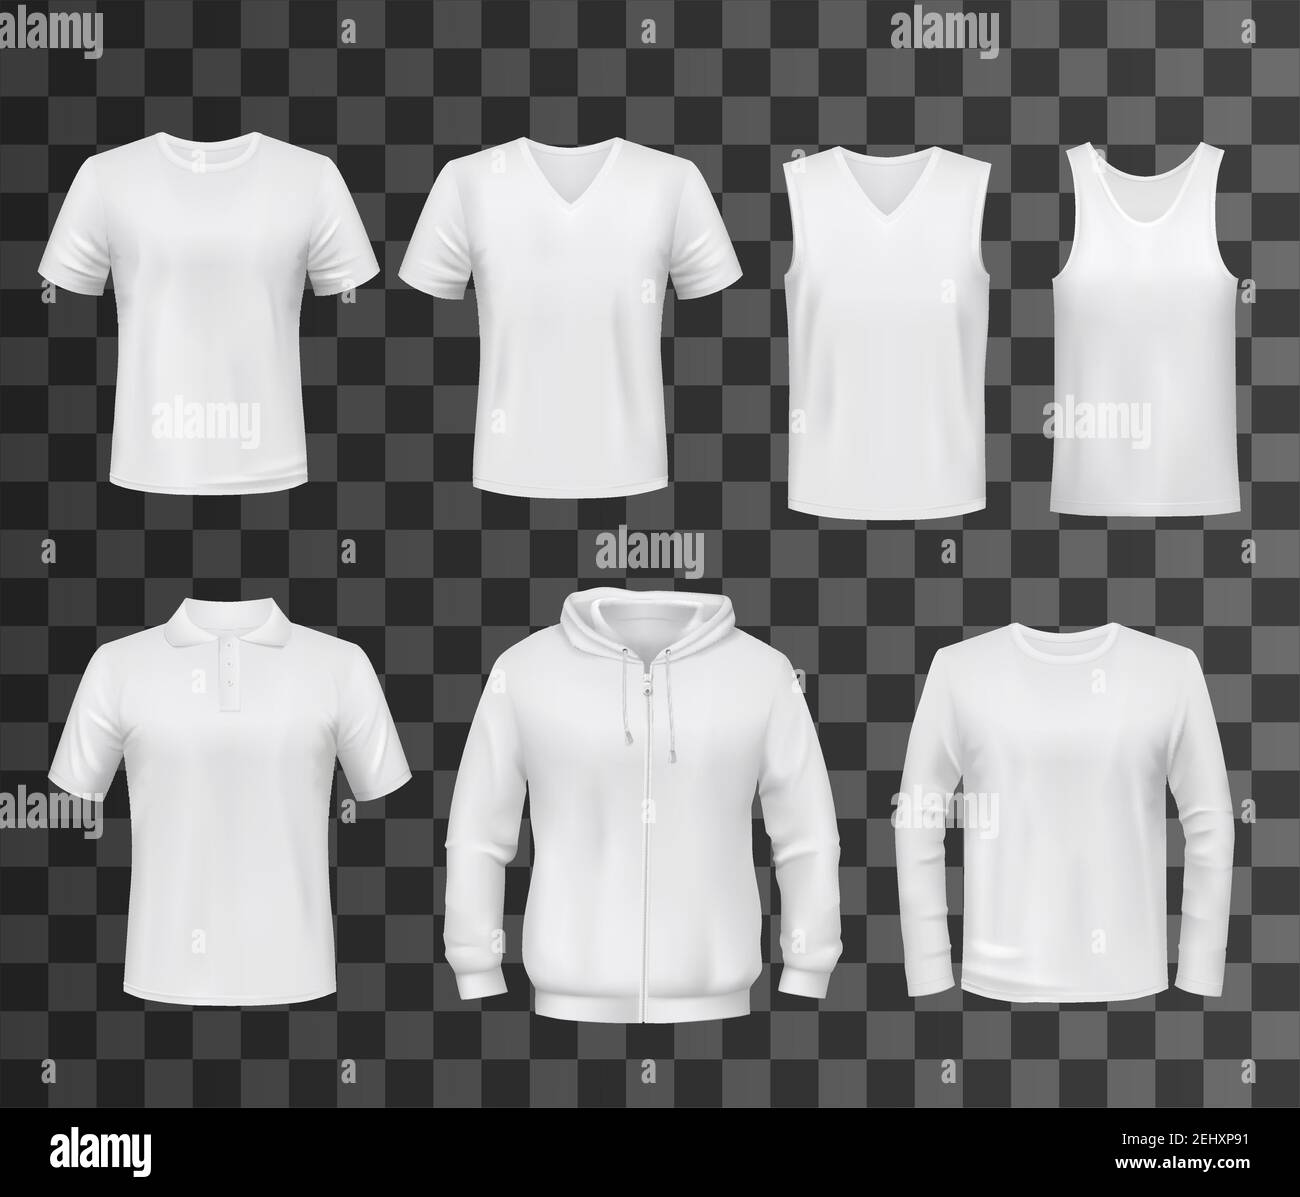 Download Shirts Template Of White Blank T Shirt Polo And Hoodie Tank Top Sweatshirt Long Sleeve And Sleeveless Tshirts Mockup Front View Of Sport Clothes Stock Vector Image Art Alamy